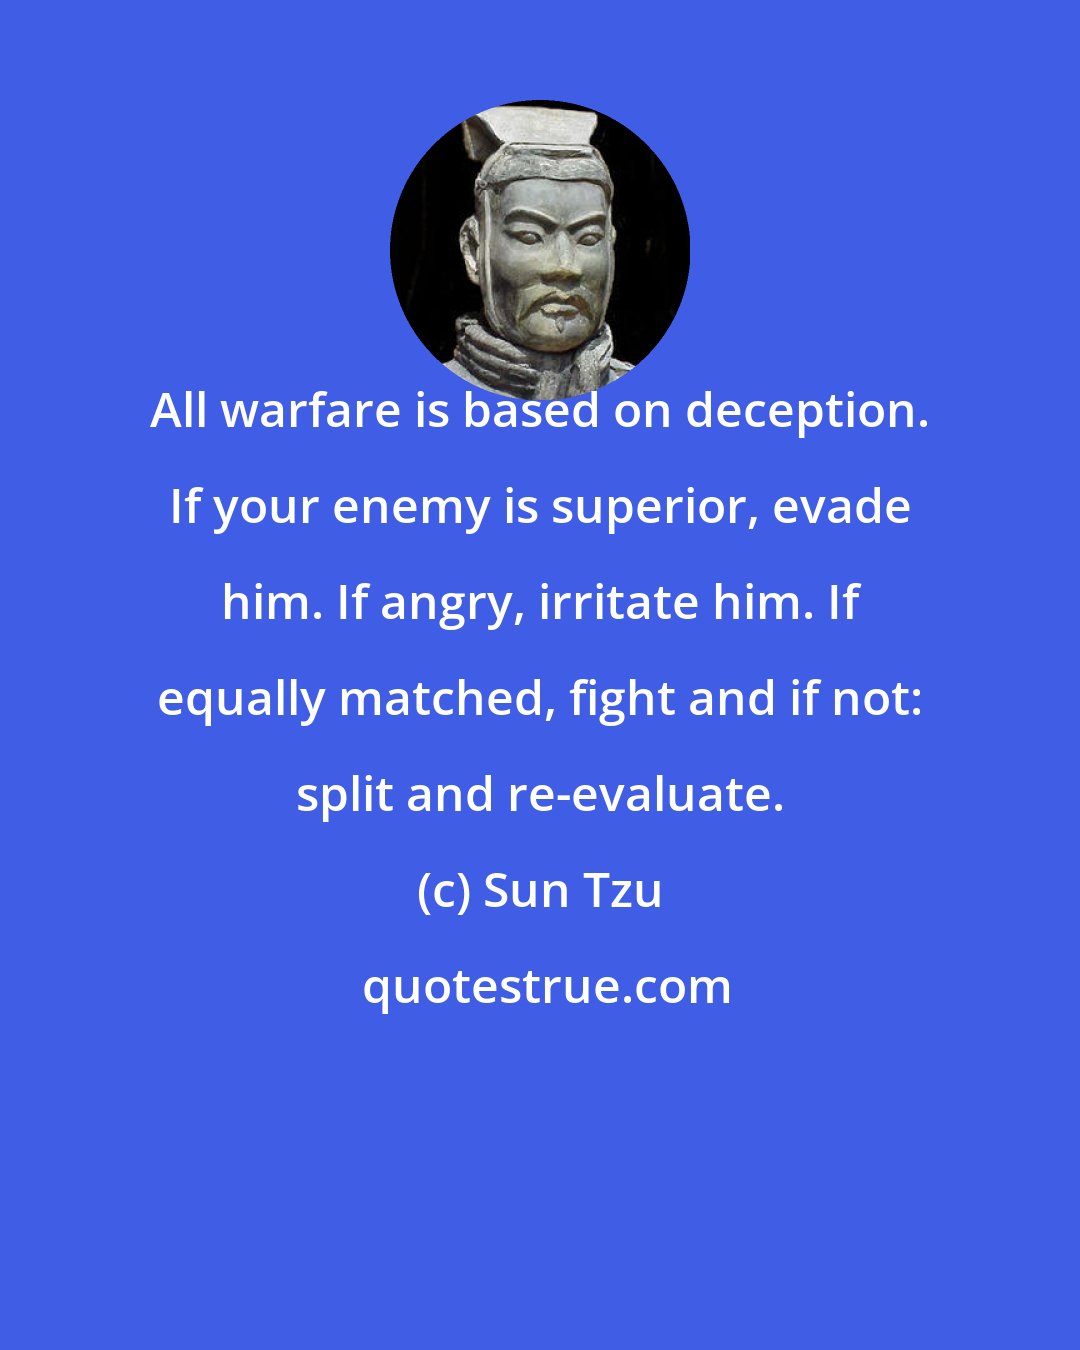 Sun Tzu: All warfare is based on deception. If your enemy is superior, evade him. If angry, irritate him. If equally matched, fight and if not: split and re-evaluate.